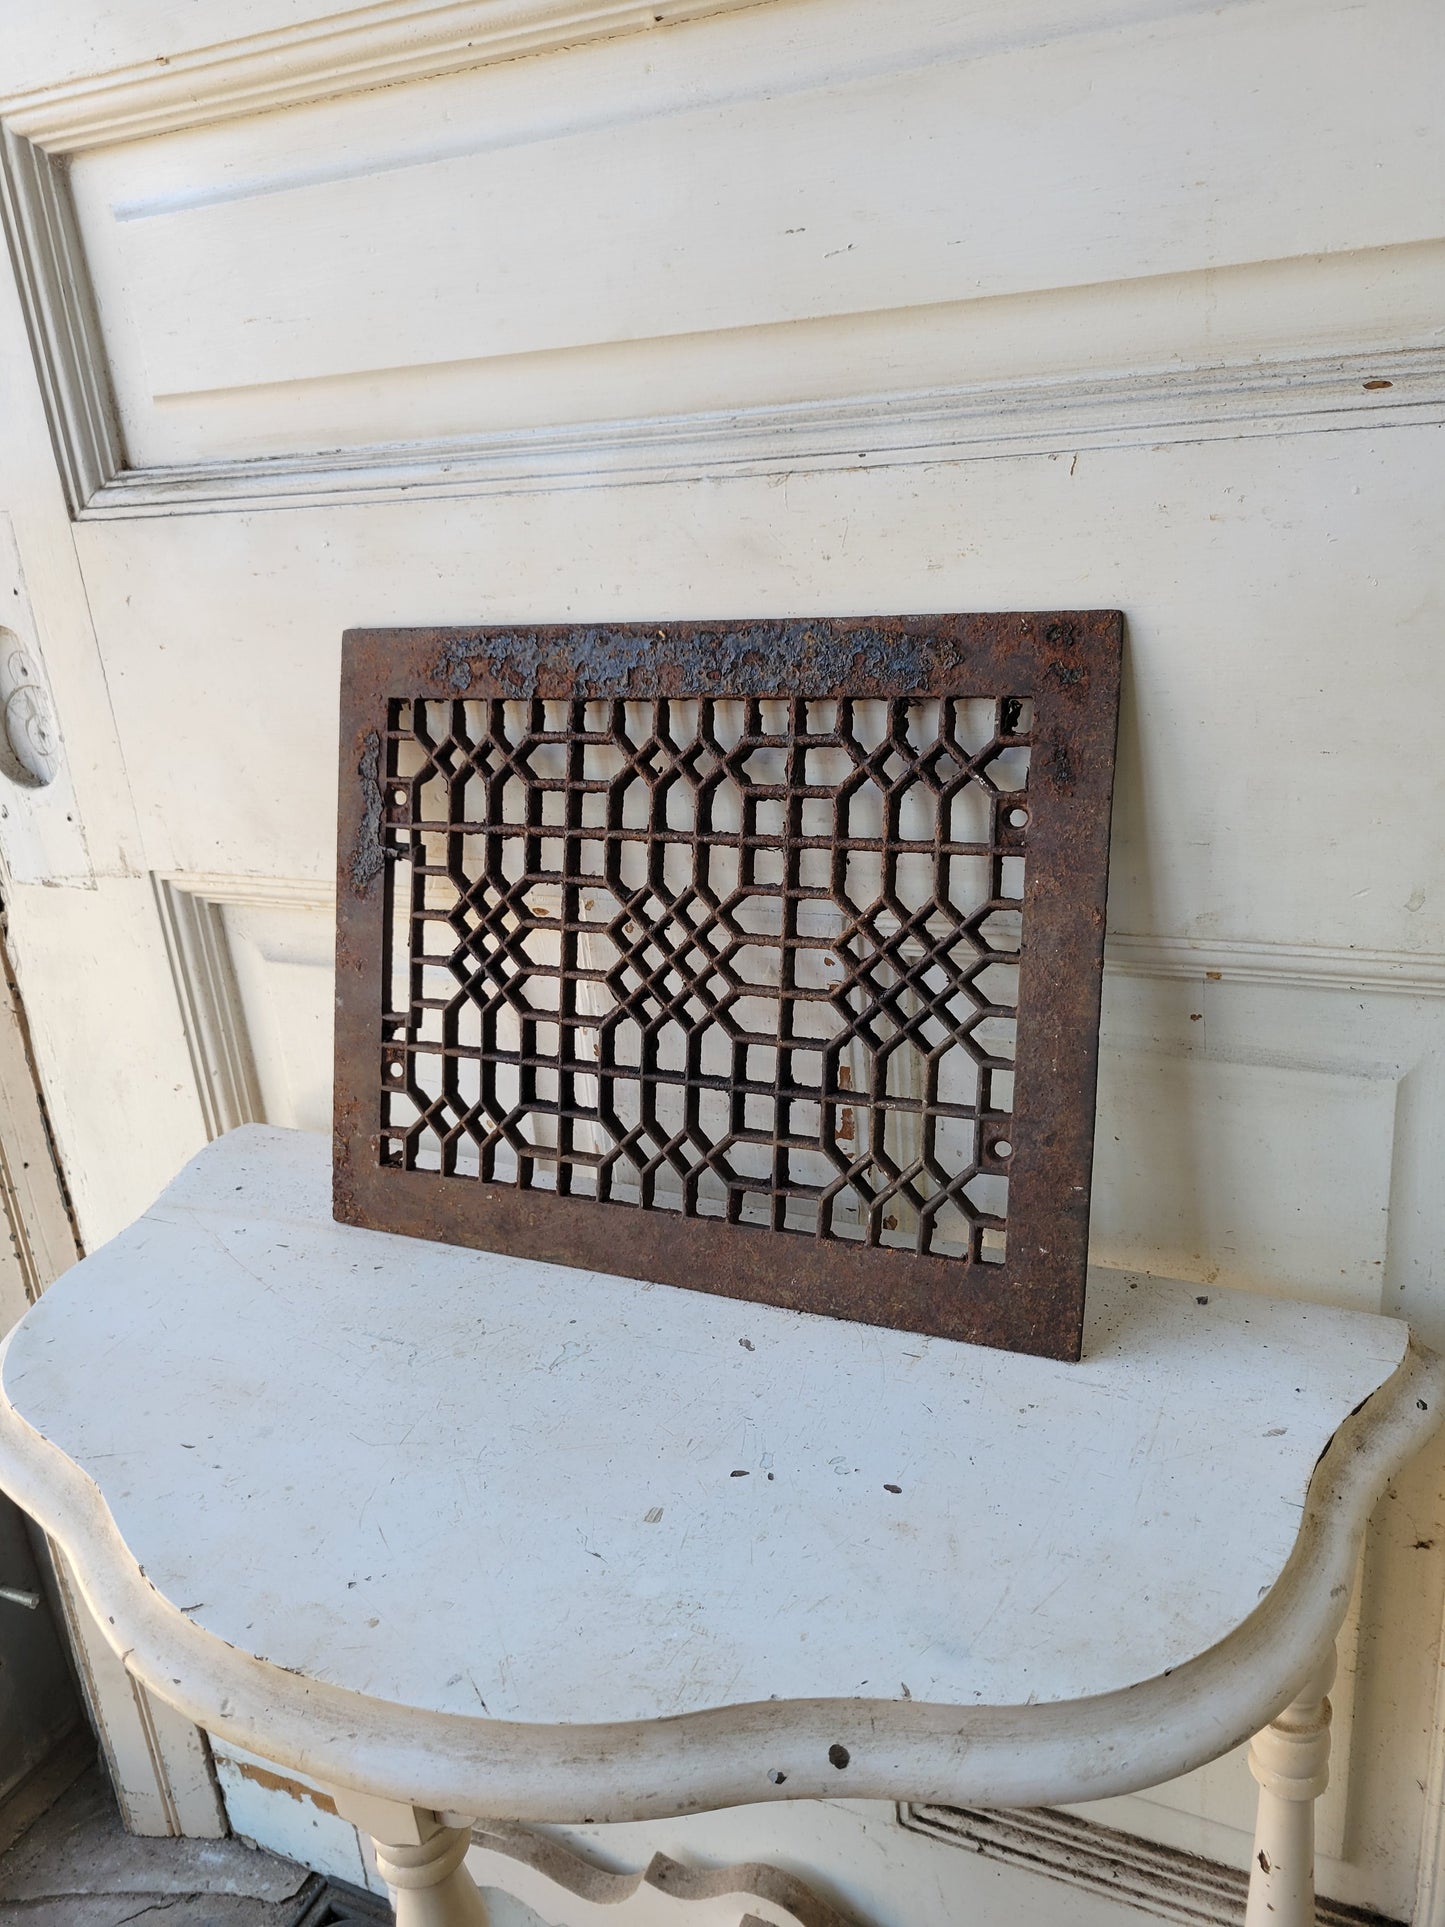 11 x 14 Antique Cast Iron Vent Cover, Floor or Wall Mount Heat Register Grate #113007